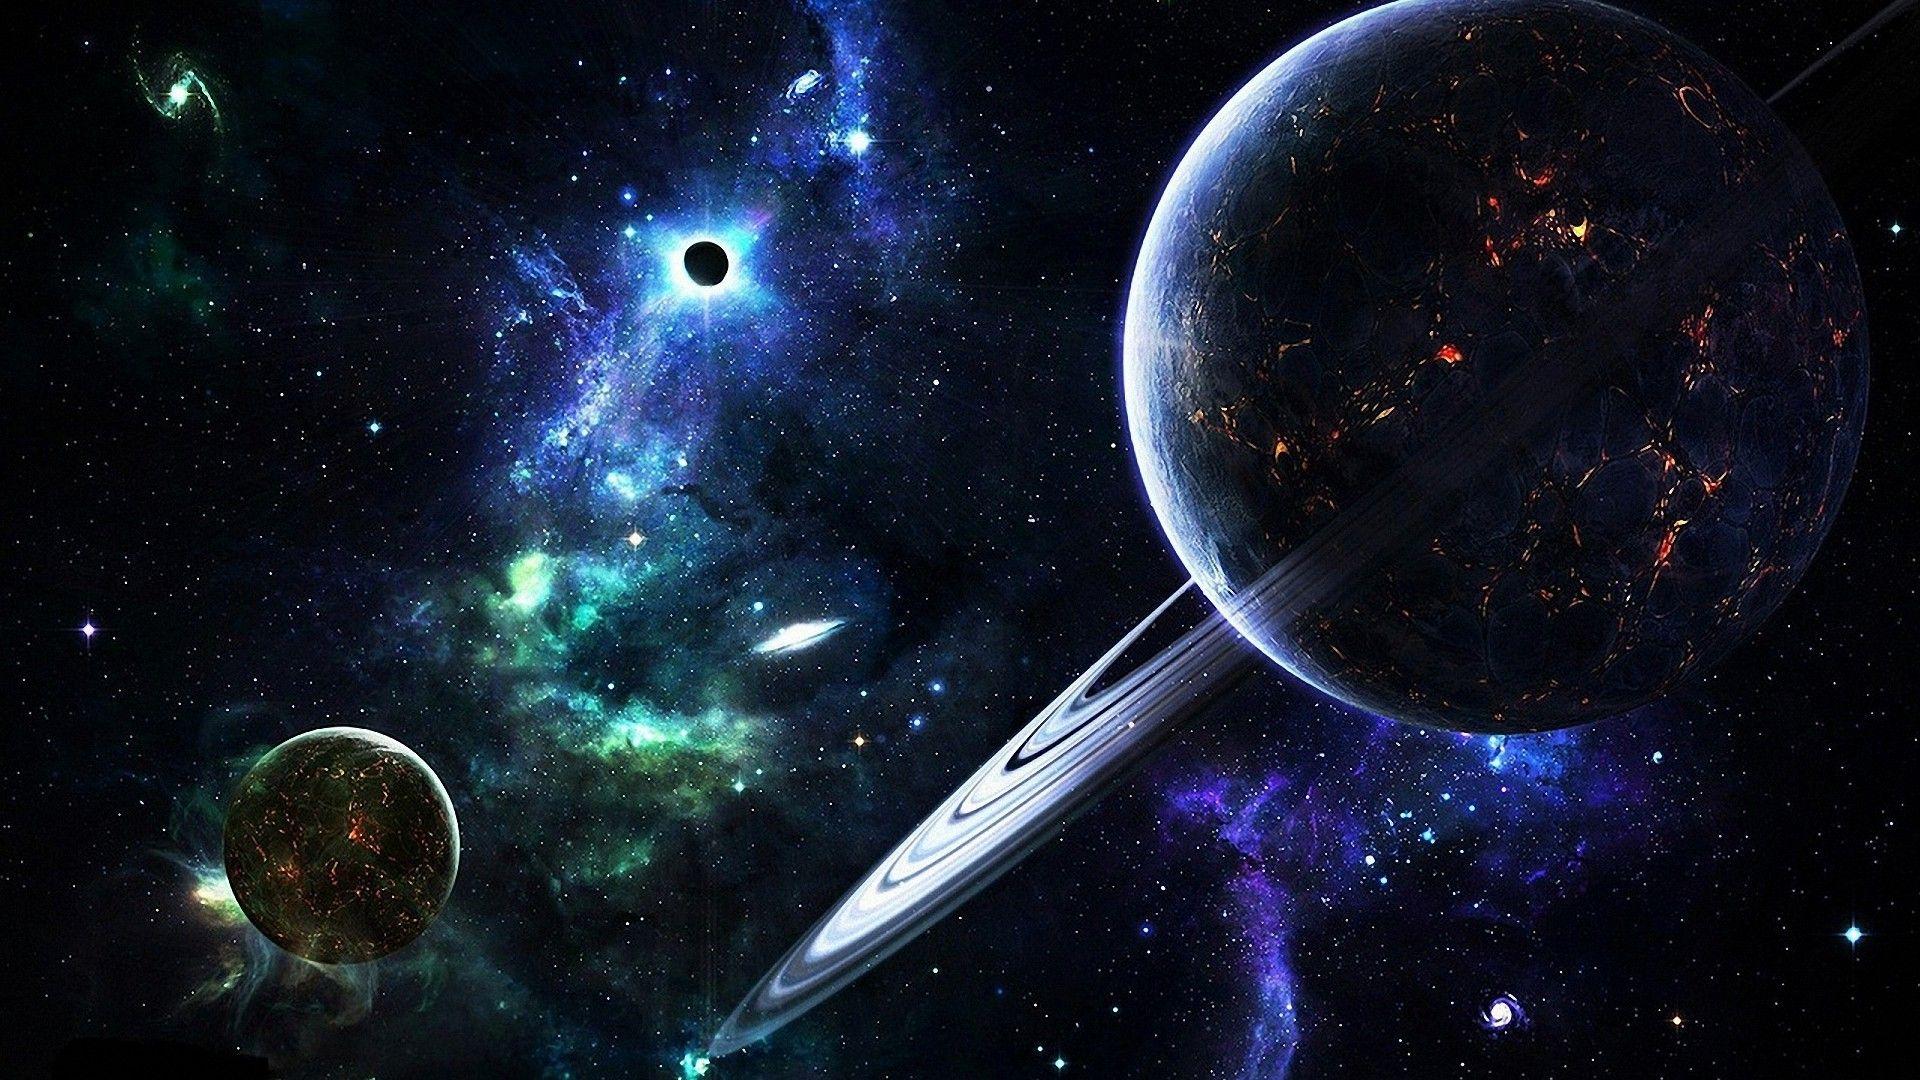 Space Planets Wallpapers Top Free Space Planets Backgrounds Wallpaperaccess 6266